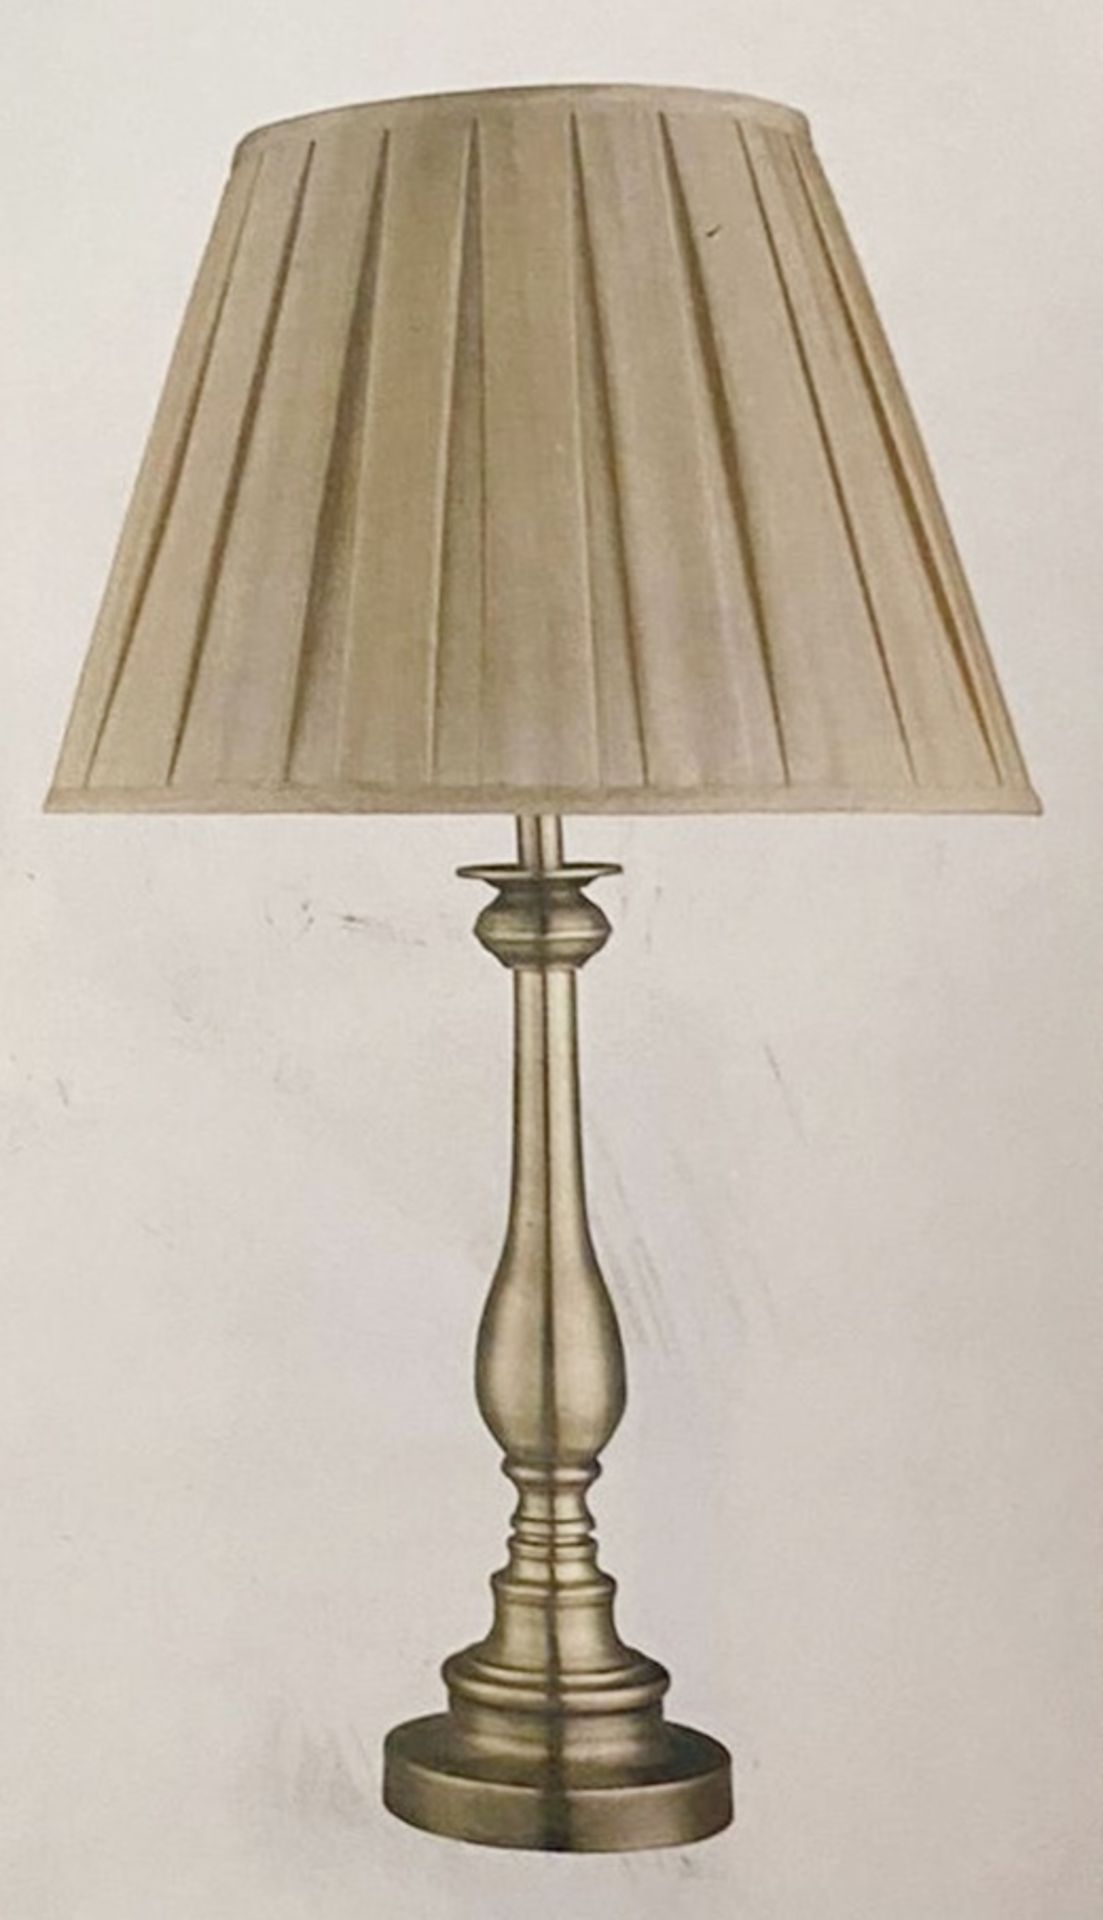 1 x Searchlight Spindle Table Lamp in Antique Brass - Ref: 4023AB - New and Boxed - RRP: £100